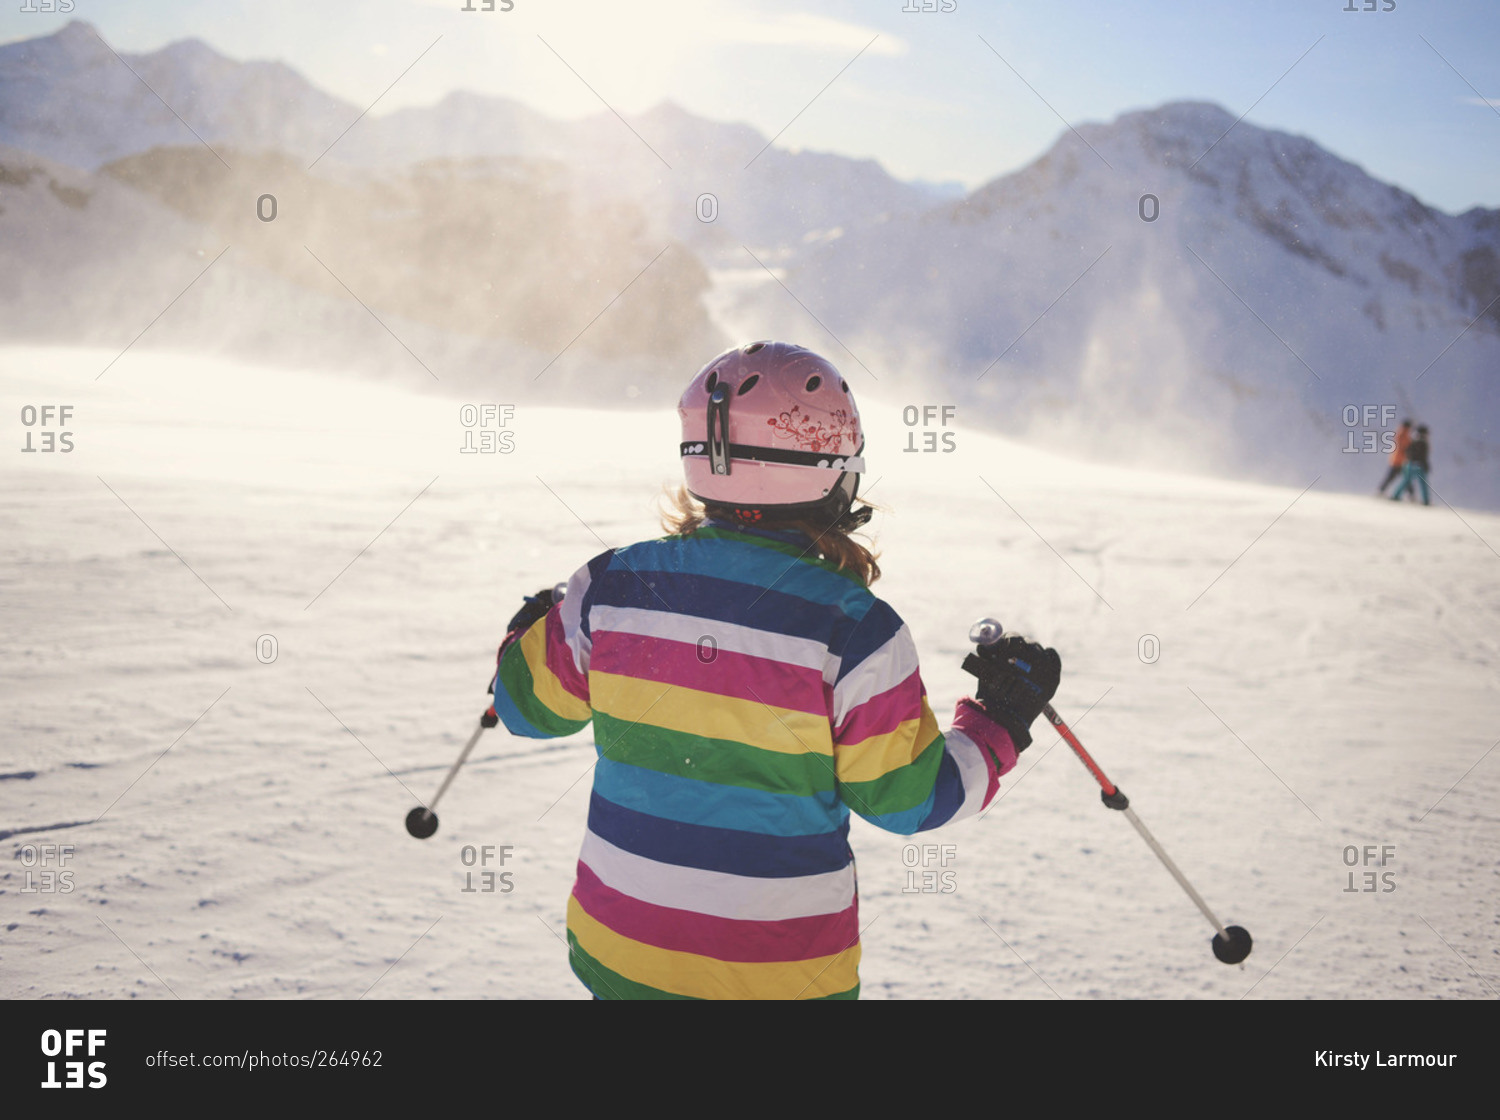 Girl in striped jacket and pink helmet skiing down slope